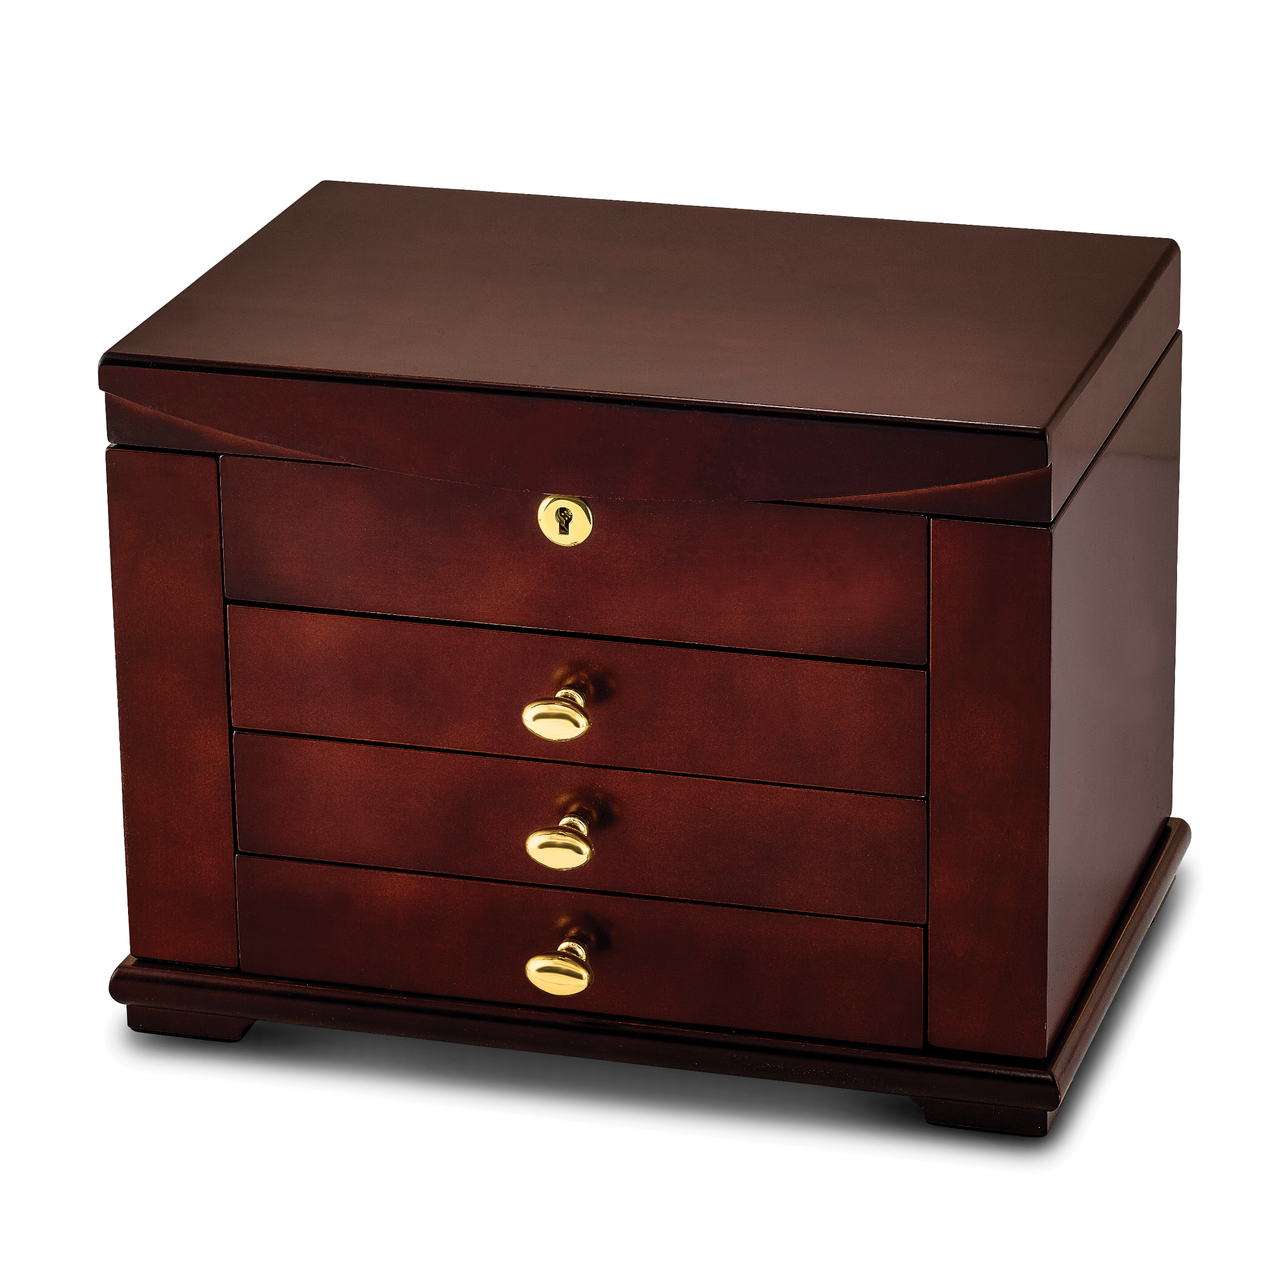 Matte Cherry Finish Poplar Veneer Jewelry Chest with Side Doors by Jere